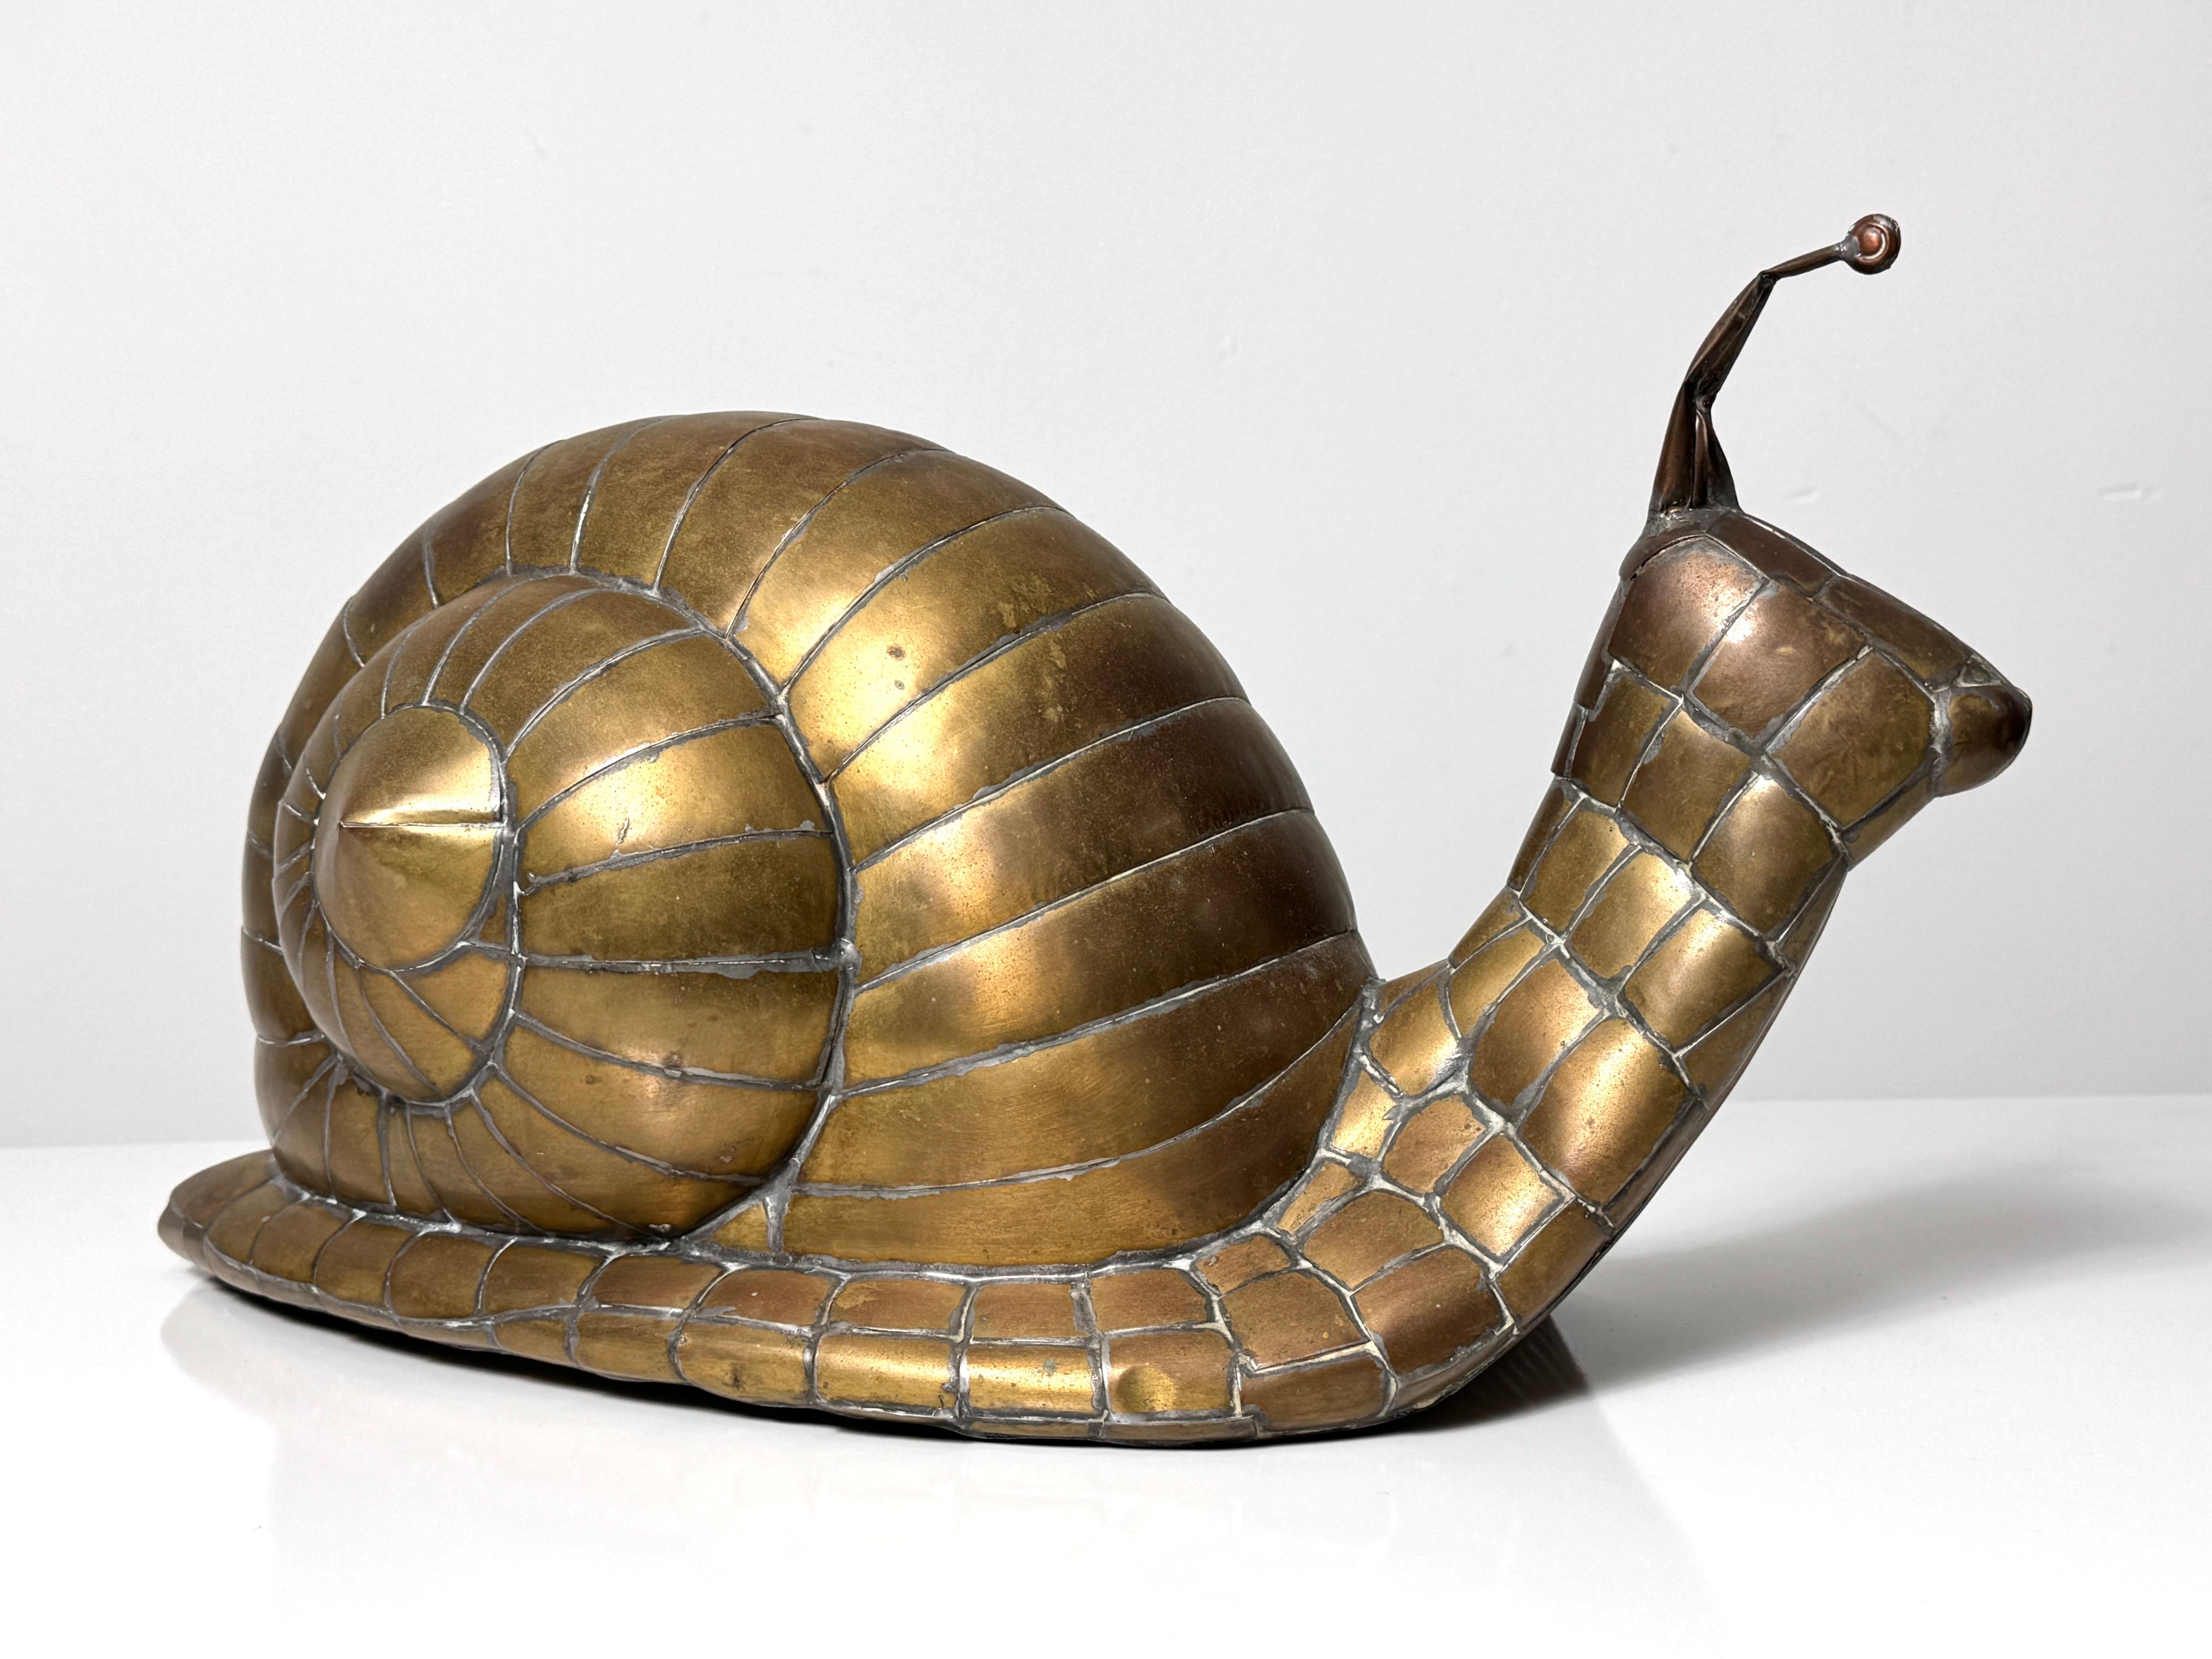 Sergio Bustamante rare snail sculpture Mexico 1970s

Hollow form brass welded construction with great detail and character
Unmarked

19 inch width
9 inch depth
10 inch height